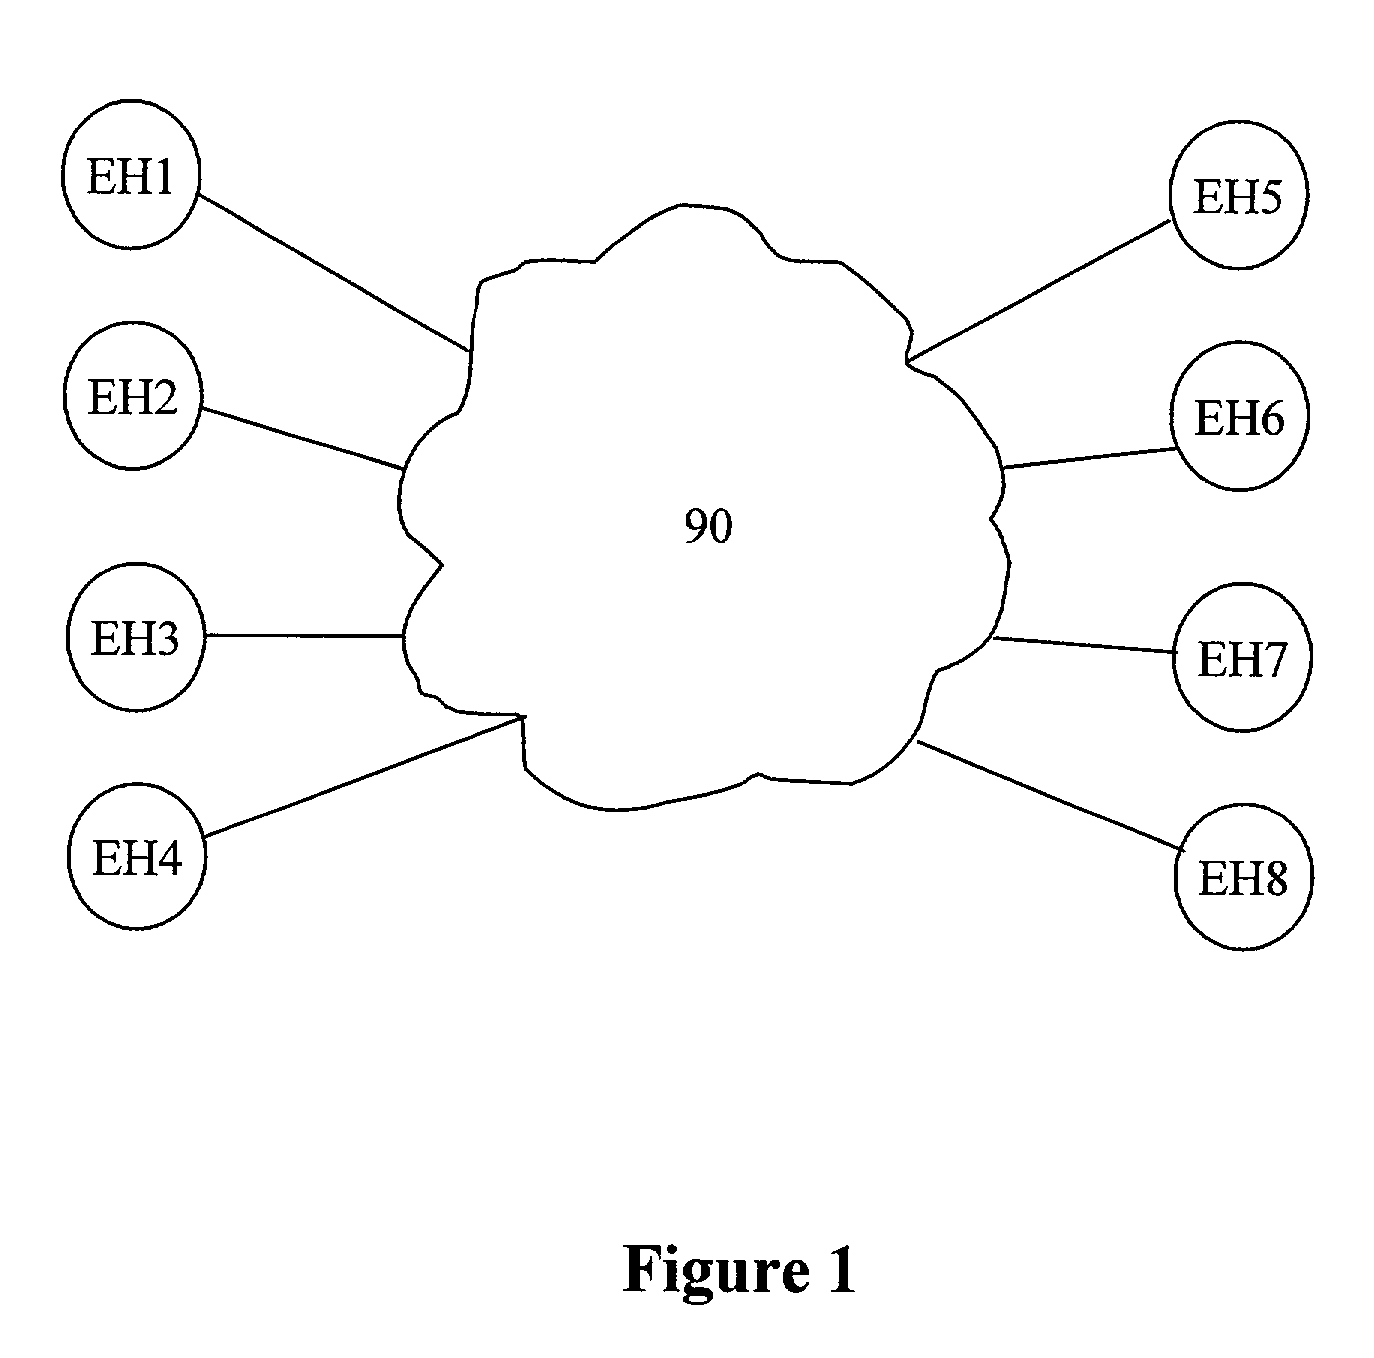 System and method for determining segment and link bandwidth capacities